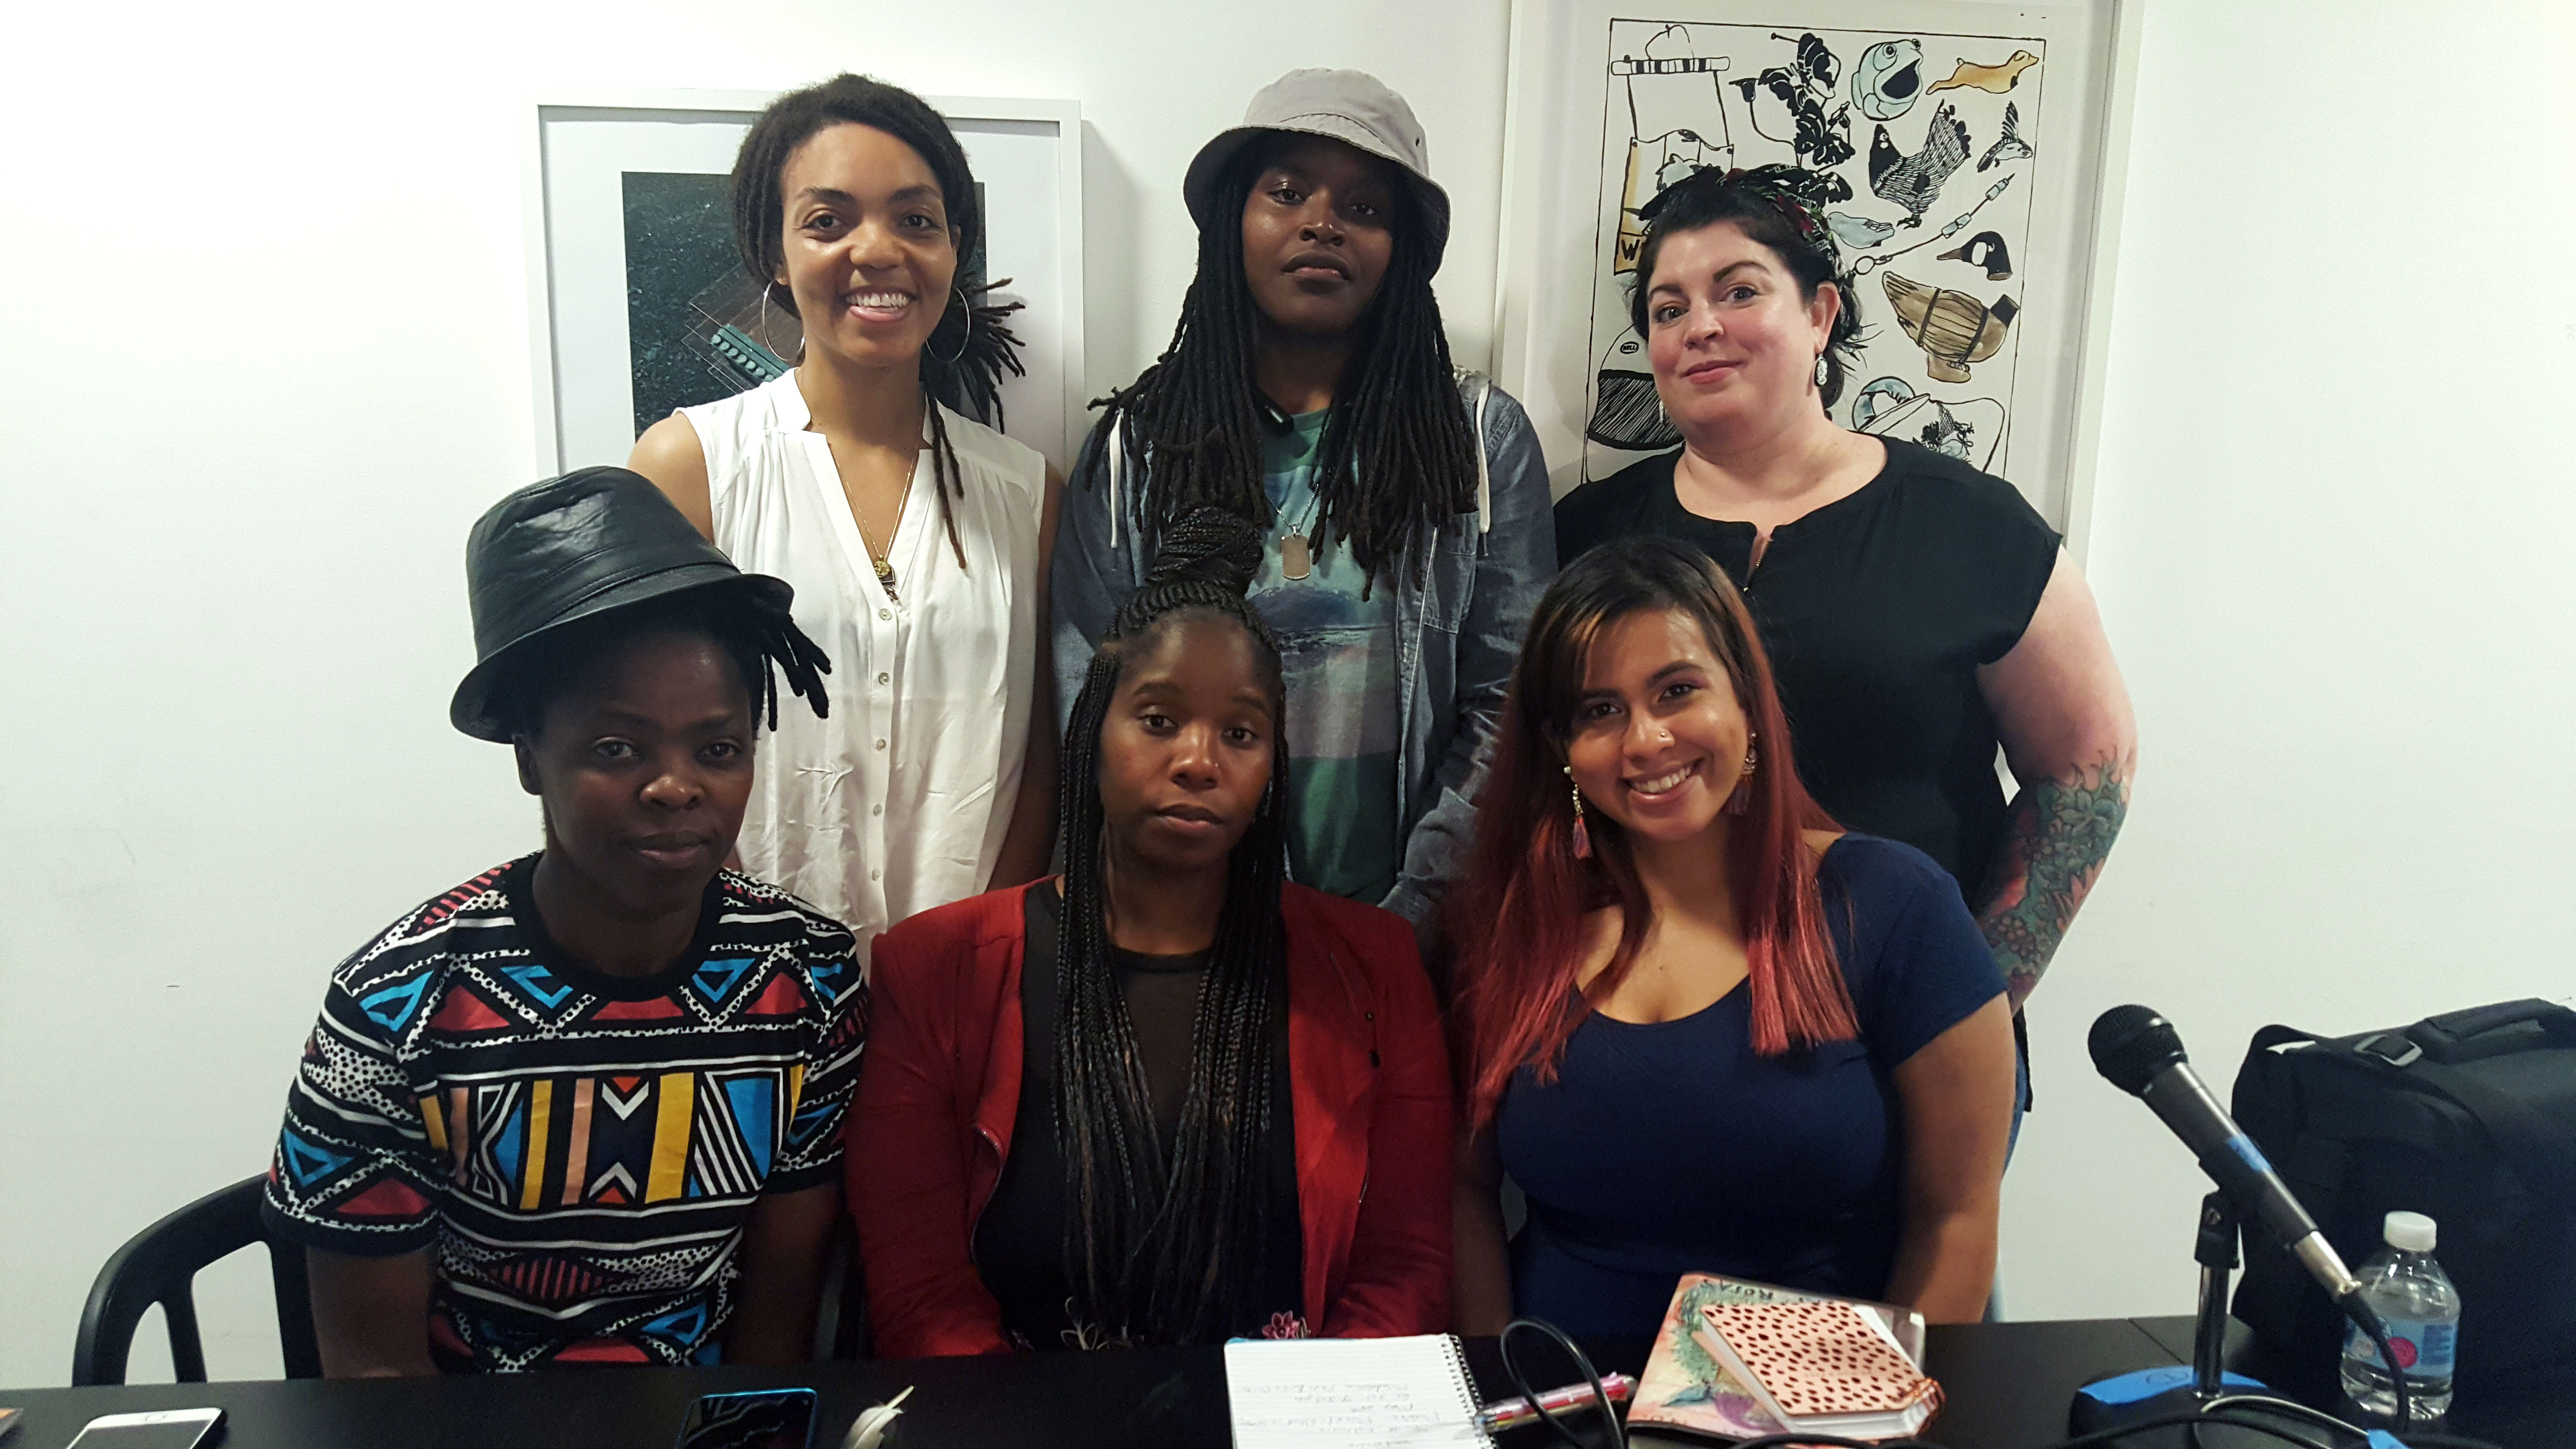 Imani Roach speaks with the Women's Mobile Museum, May, 2018. Front row (L to R): Artist Zanele Muholi, apprentices Shasta Bady and “Muffy” Ashley Torres; Back row (L to R): Imani Roach, apprentices Latasha “Tash” Billington and Carrie-Anne Shimborski